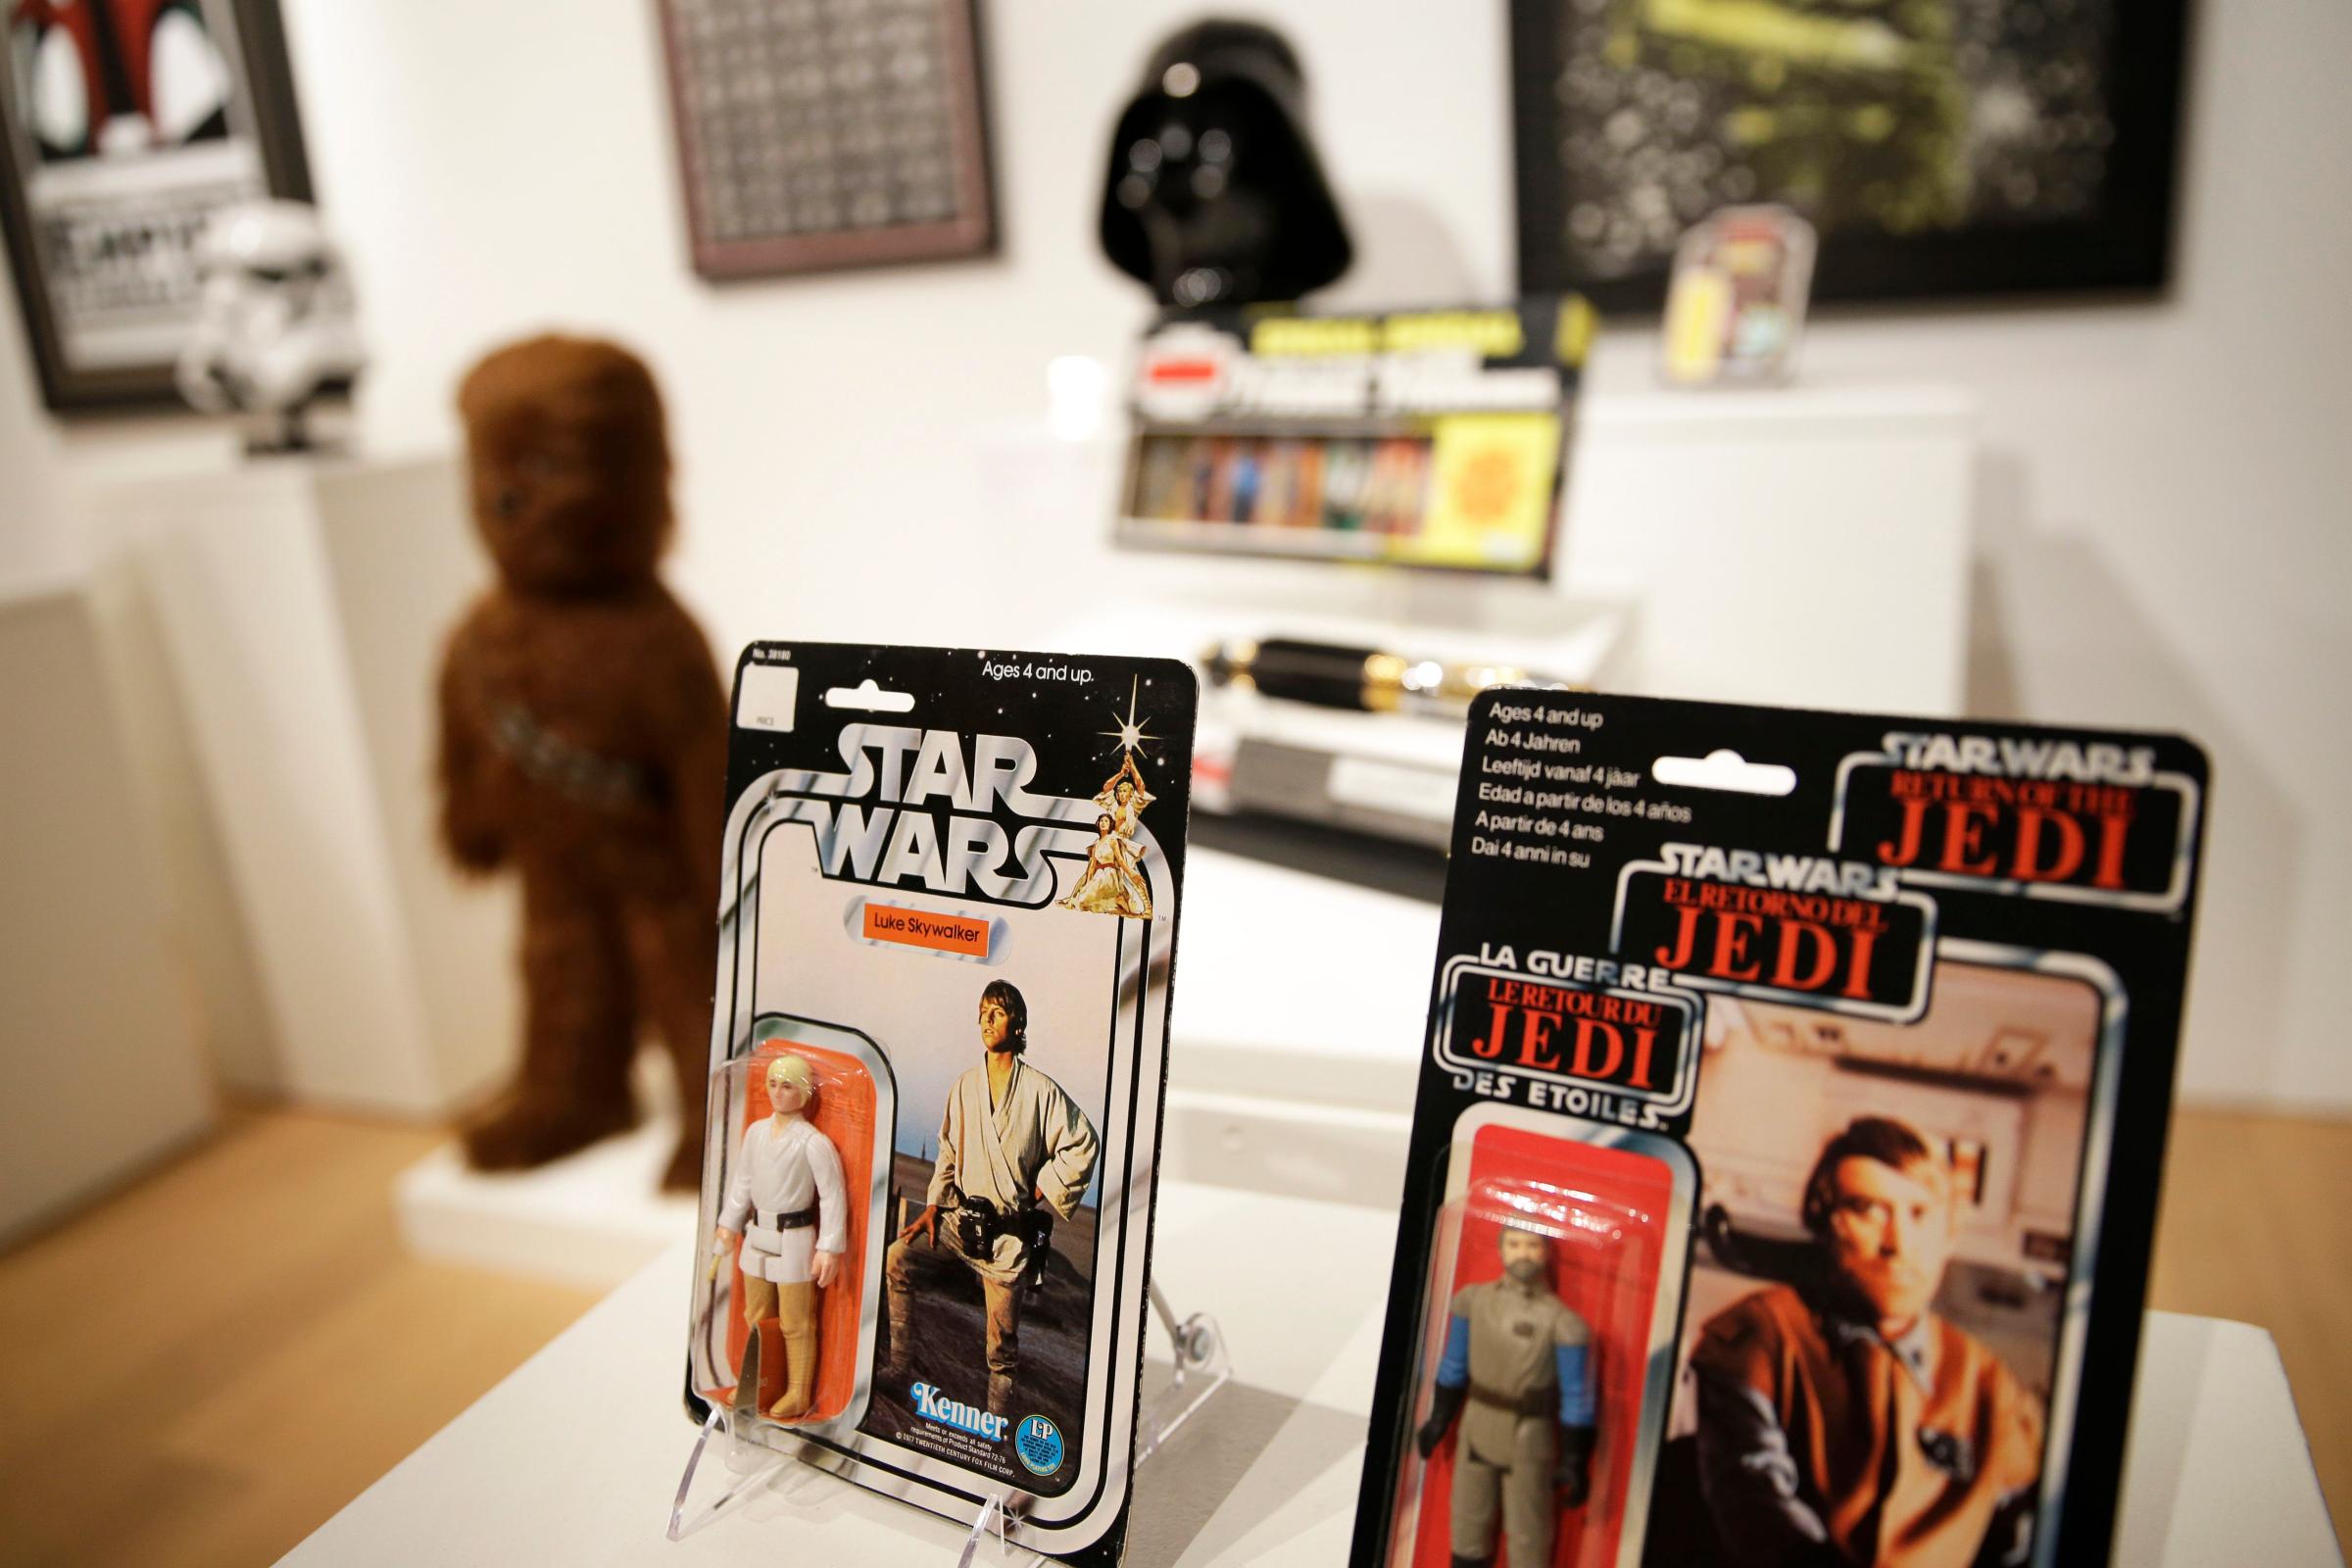 Toys and other memorabilia from Star Wars are displayed at Sotheby's in New York City on Dec. 2, 2015.